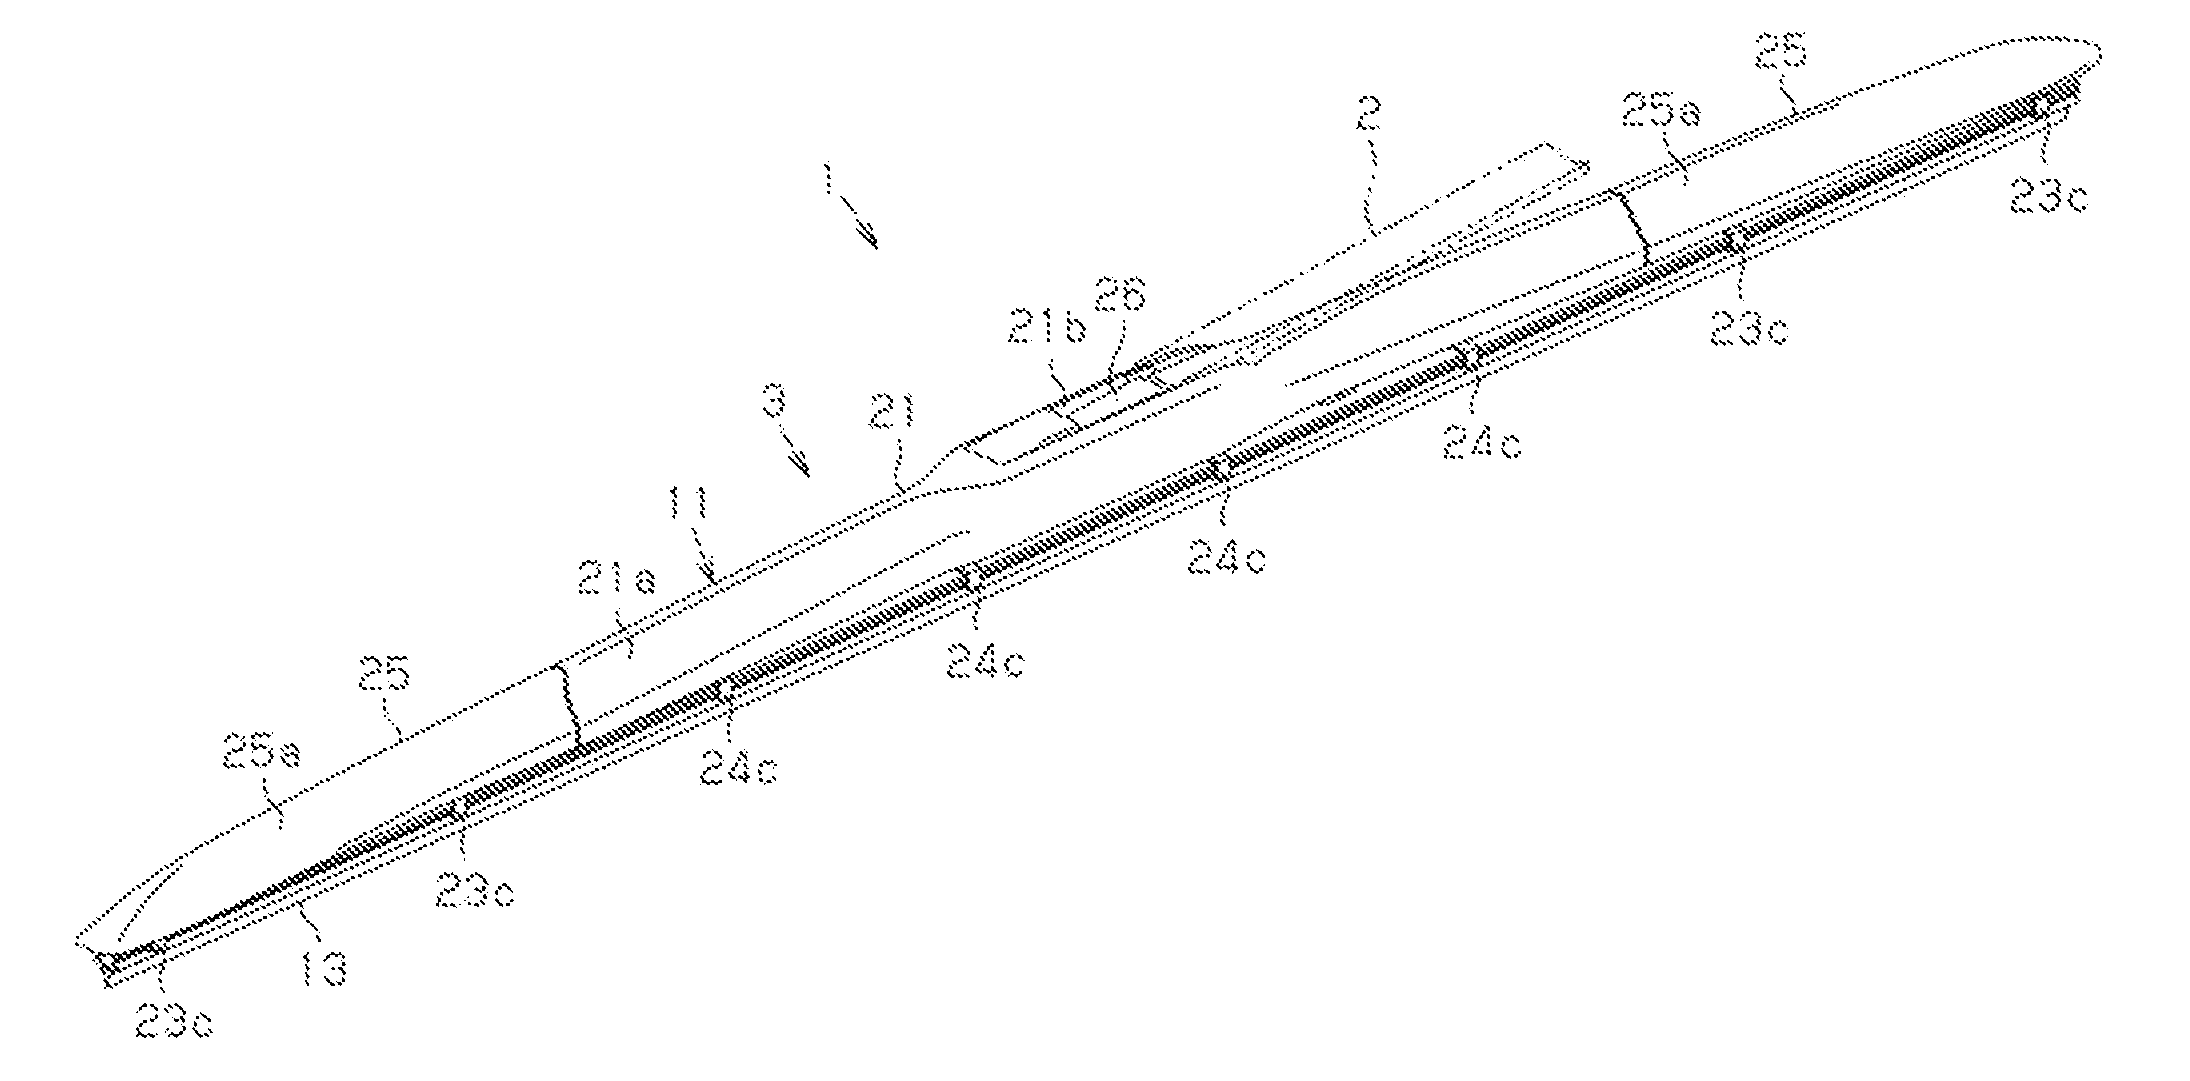 Wiper lever assembly and wiper blade